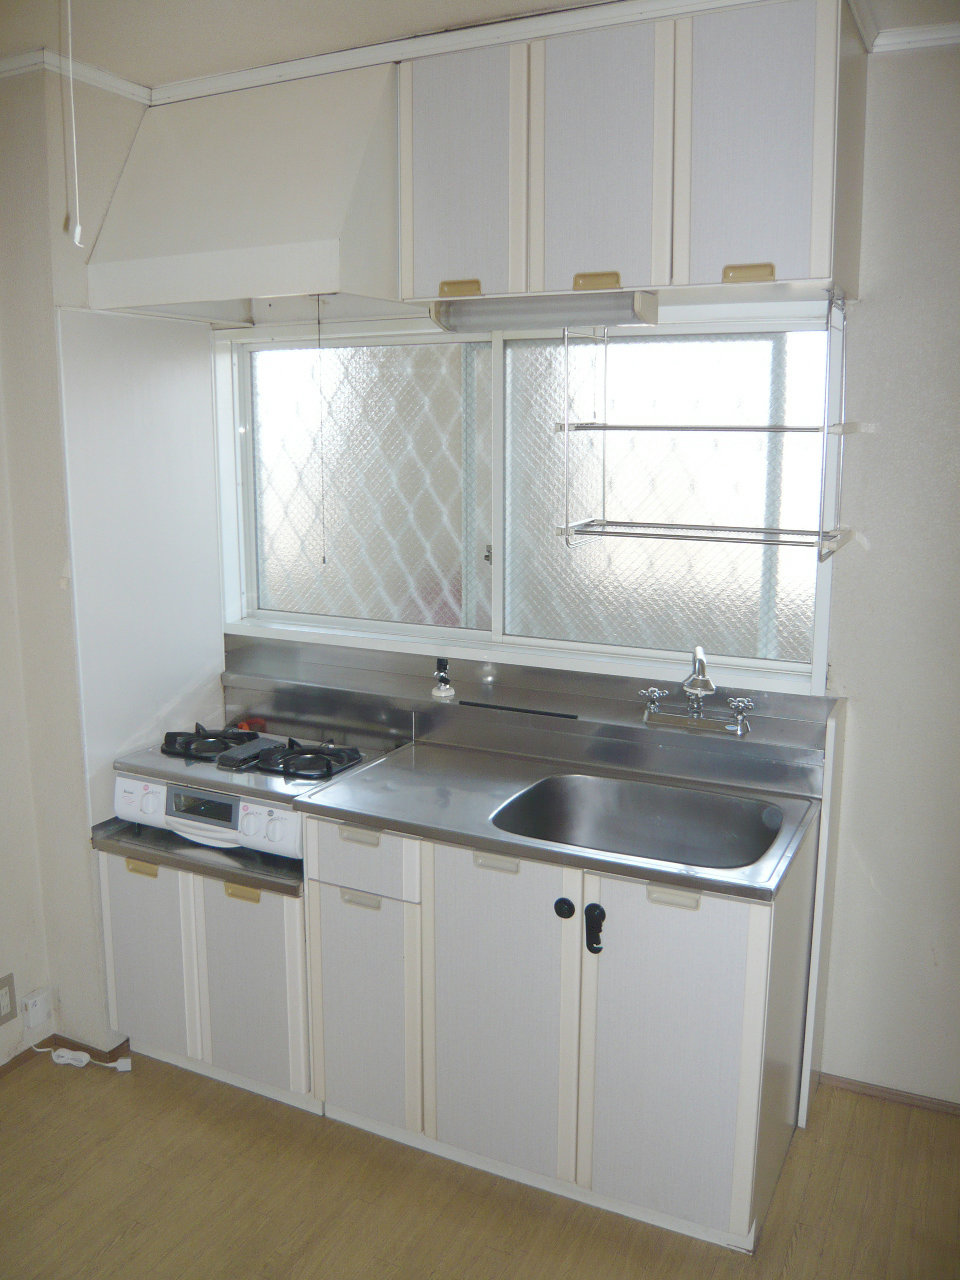 Kitchen. It is a wonderful kitchen with cleanliness. Please enjoy the dishes